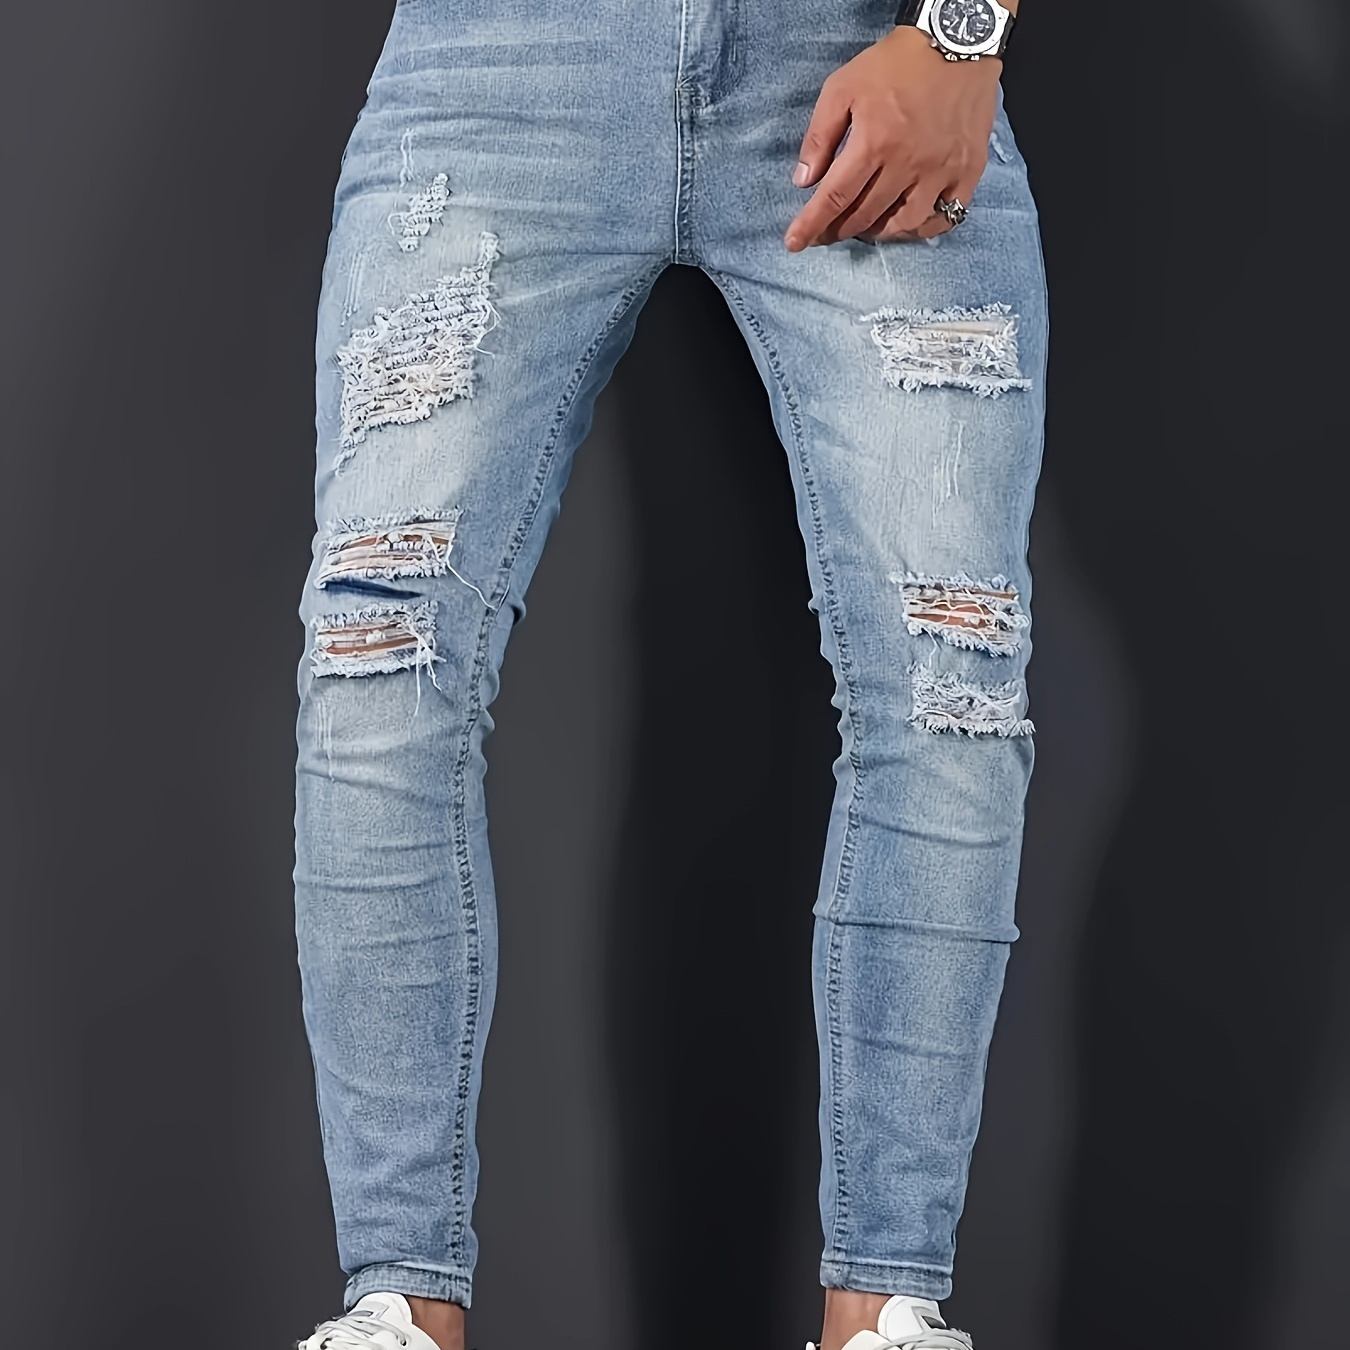 

Slim Fit Ripped Jeans, Men's Casual Street Style Distressed Stretch Denim Pants